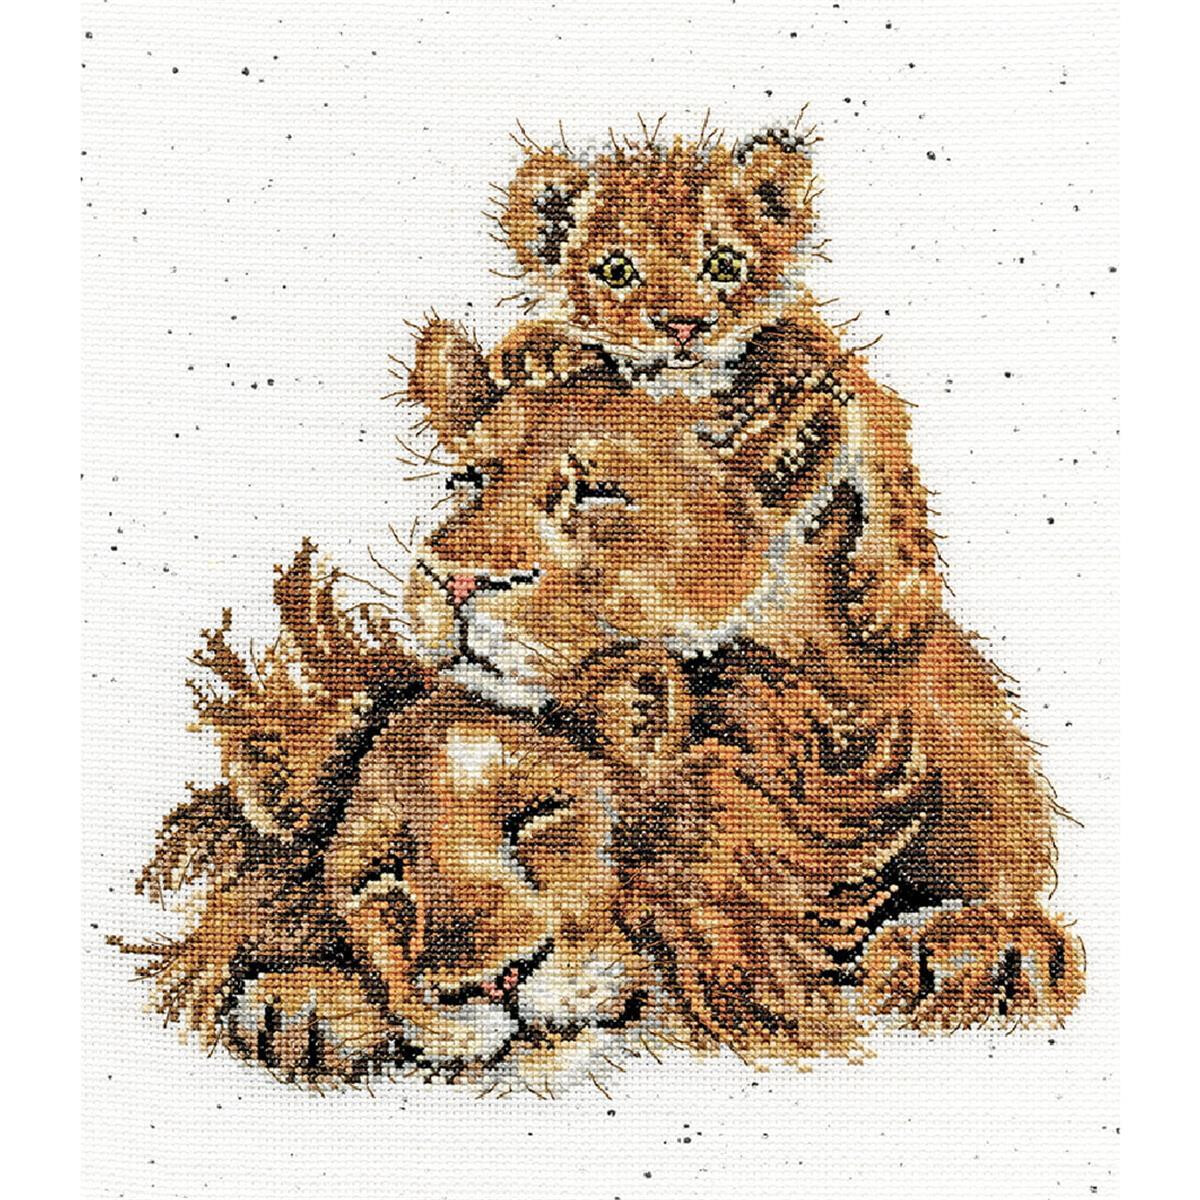 A cross-stitch embroidery picture depicting a lion...